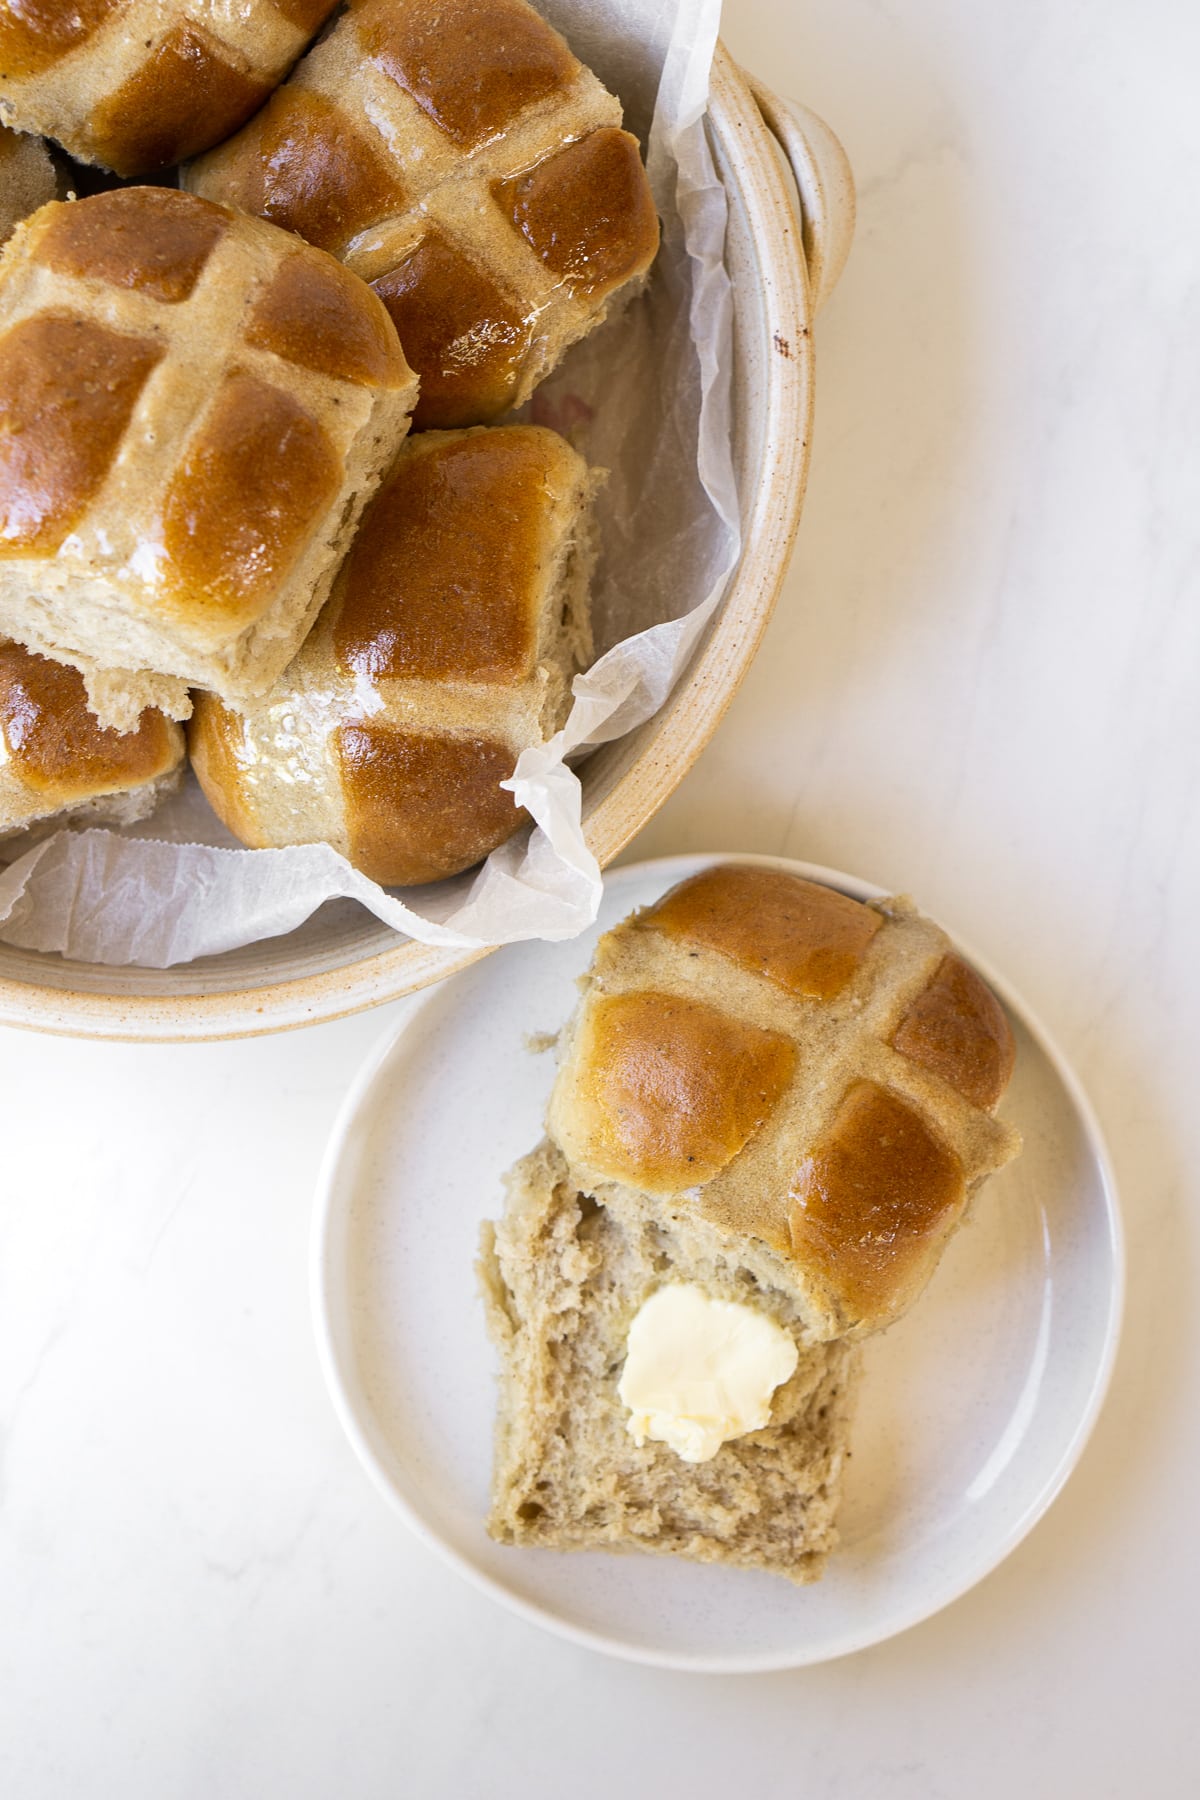 Hot crossed buns with butter.